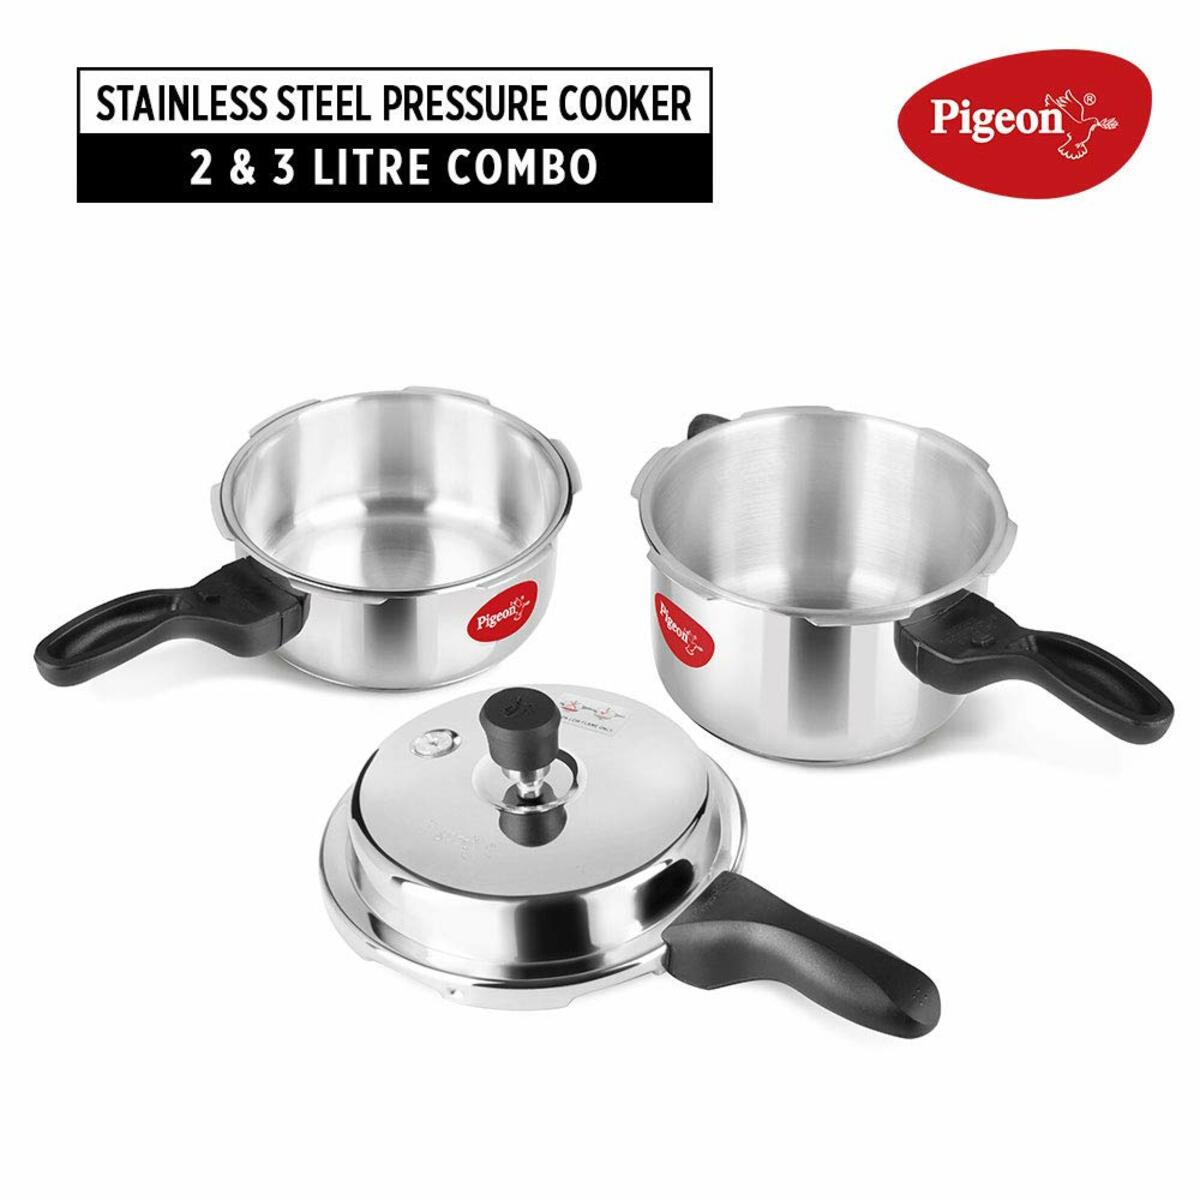 Pigeon Stainless Steel Pressure Cooker Combi 2+3Ltr